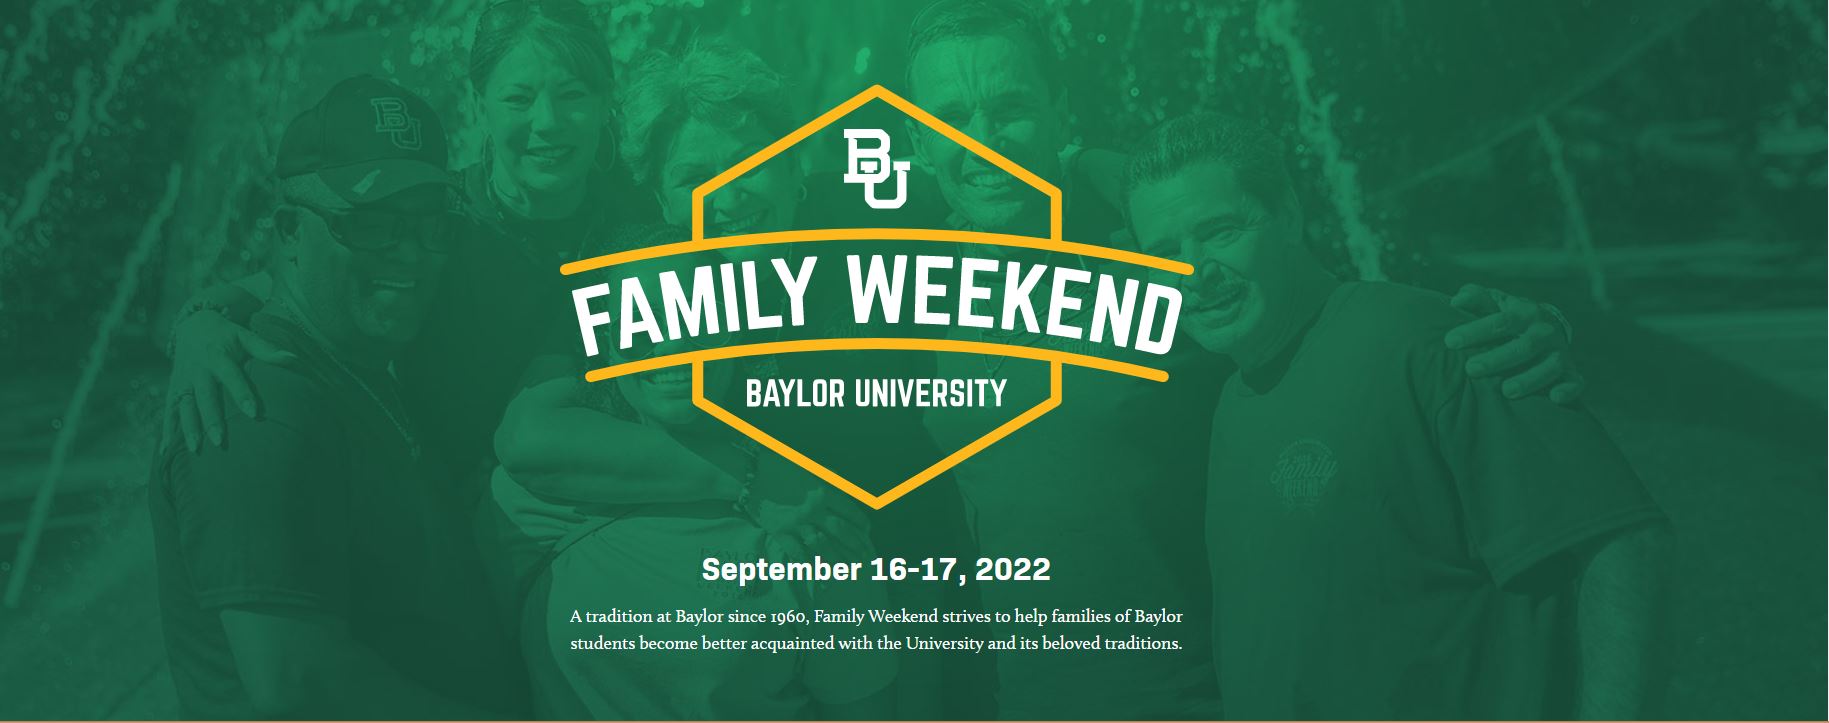 Baylor Family Weekend 9/16-9/17